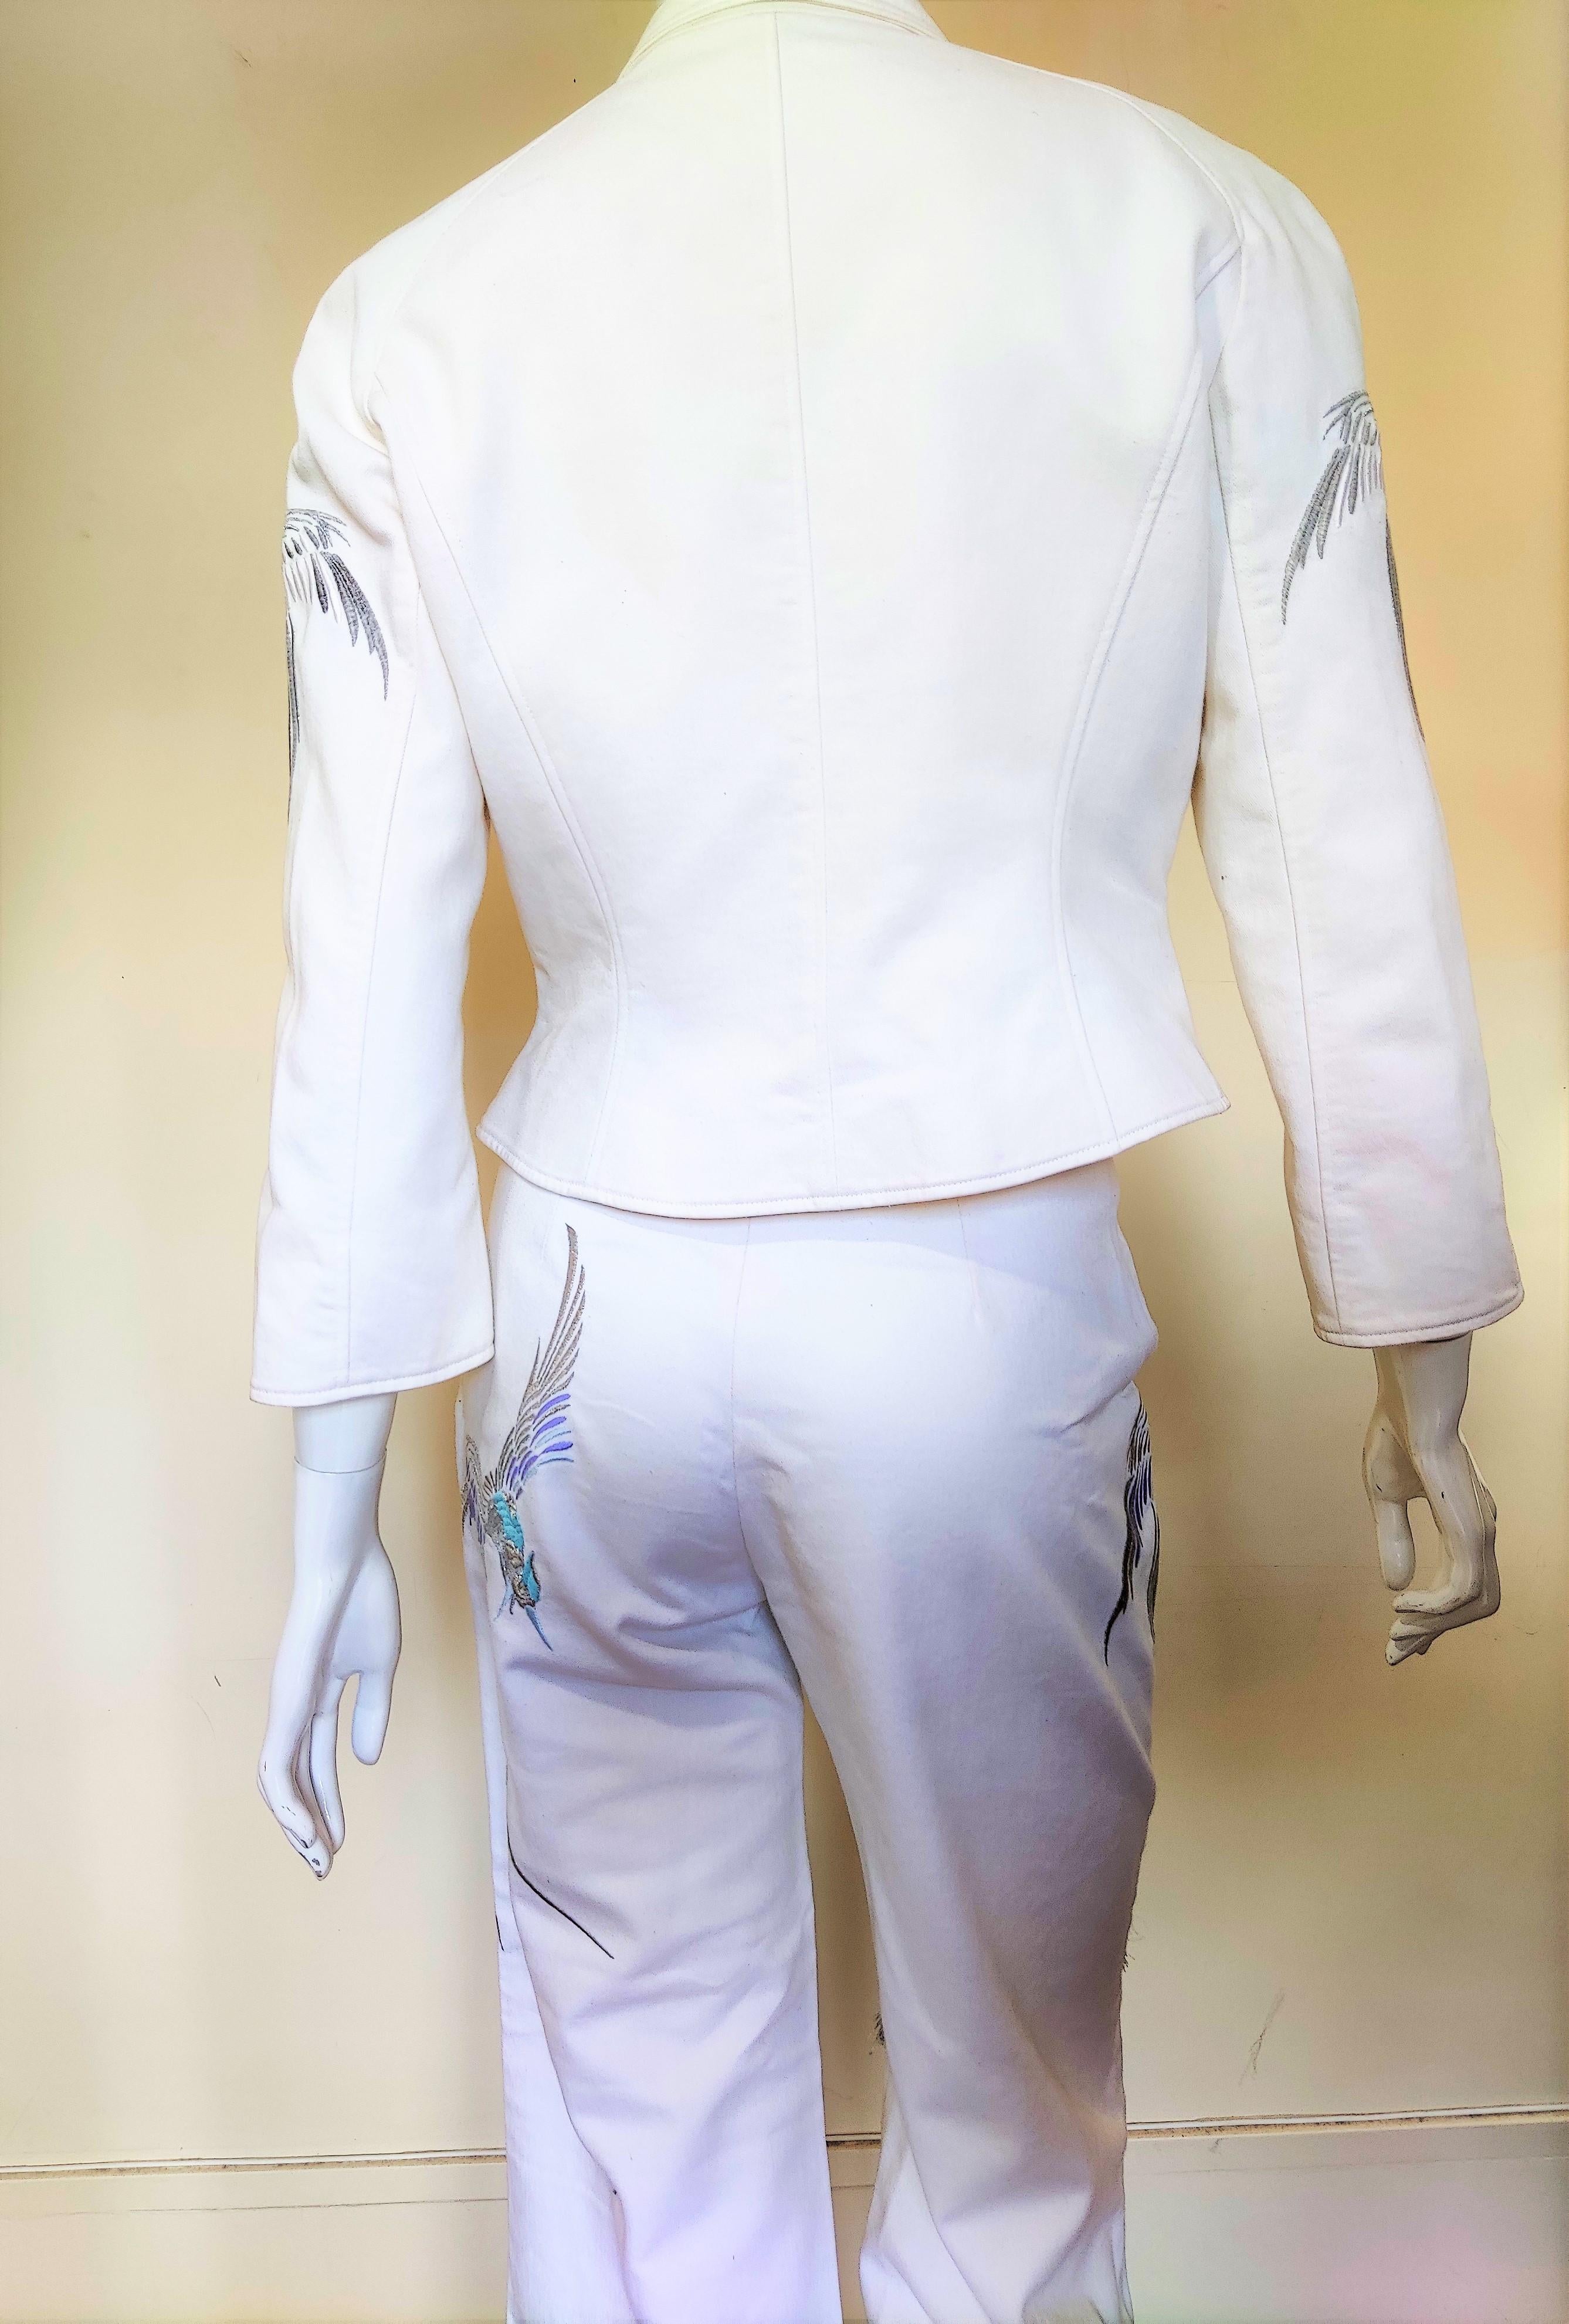 Thierry Mugler Peacock Bird White Gown Couture Pants Jacket Ensemble Suit For Sale 4